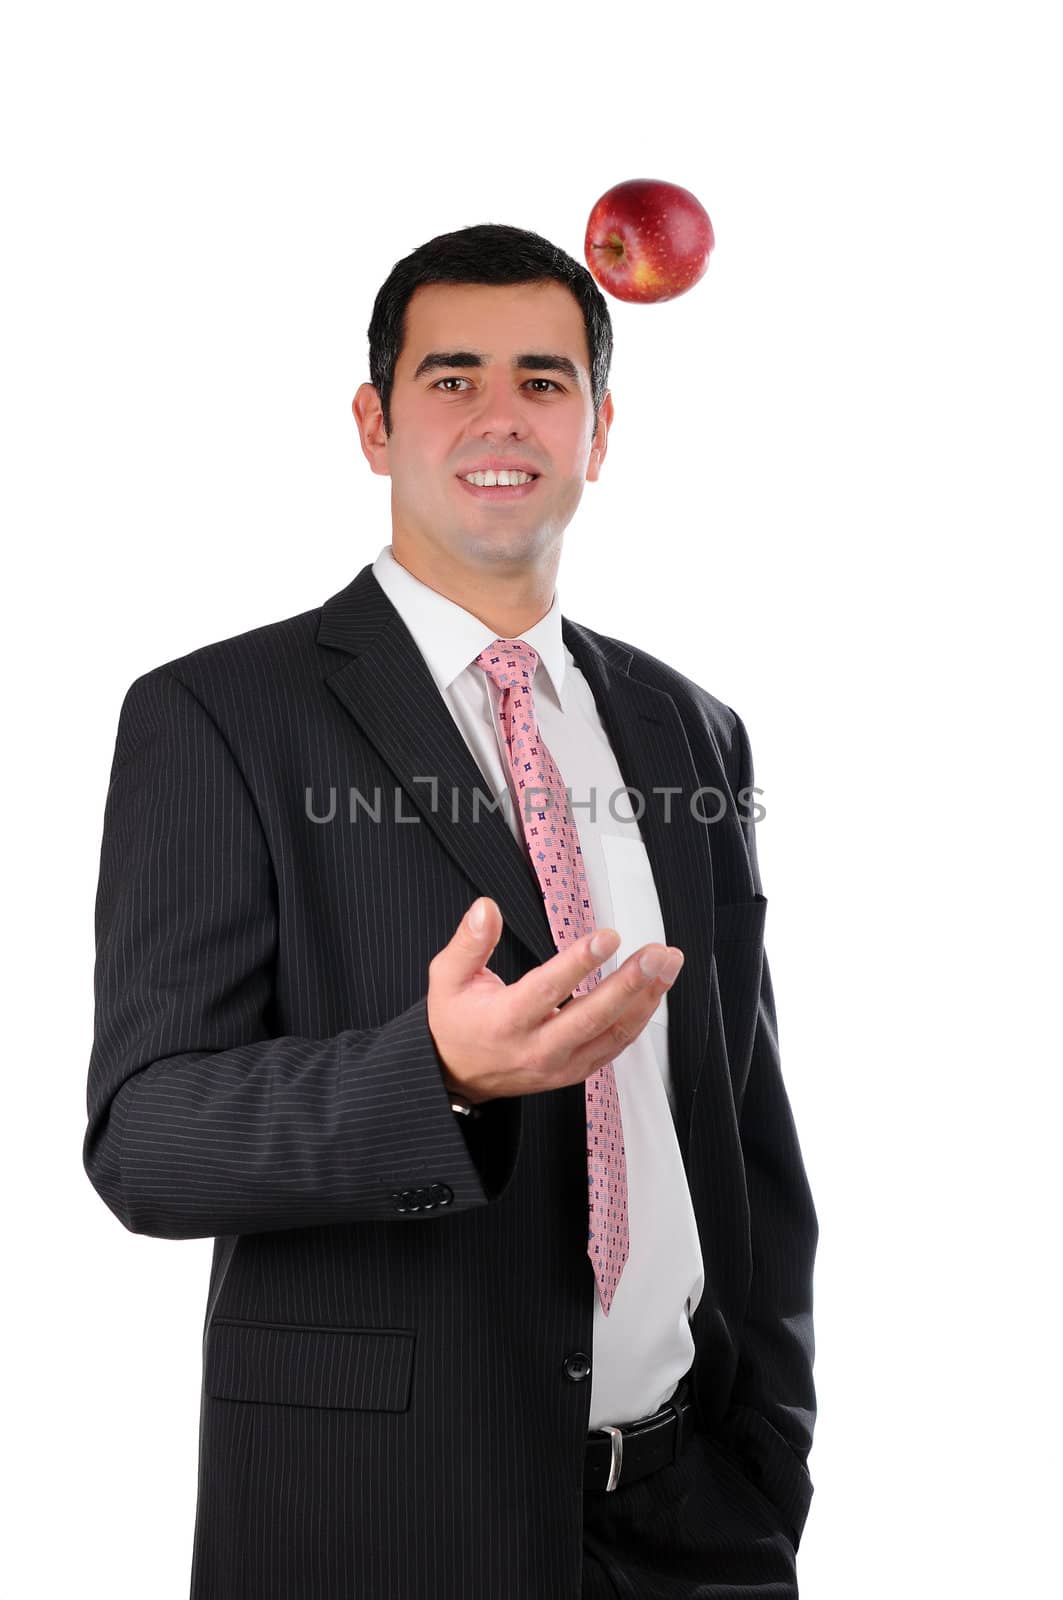 Portrait of a young cheerful businessman in a dark suit tossing an apple isolated on white by gravityimaging1